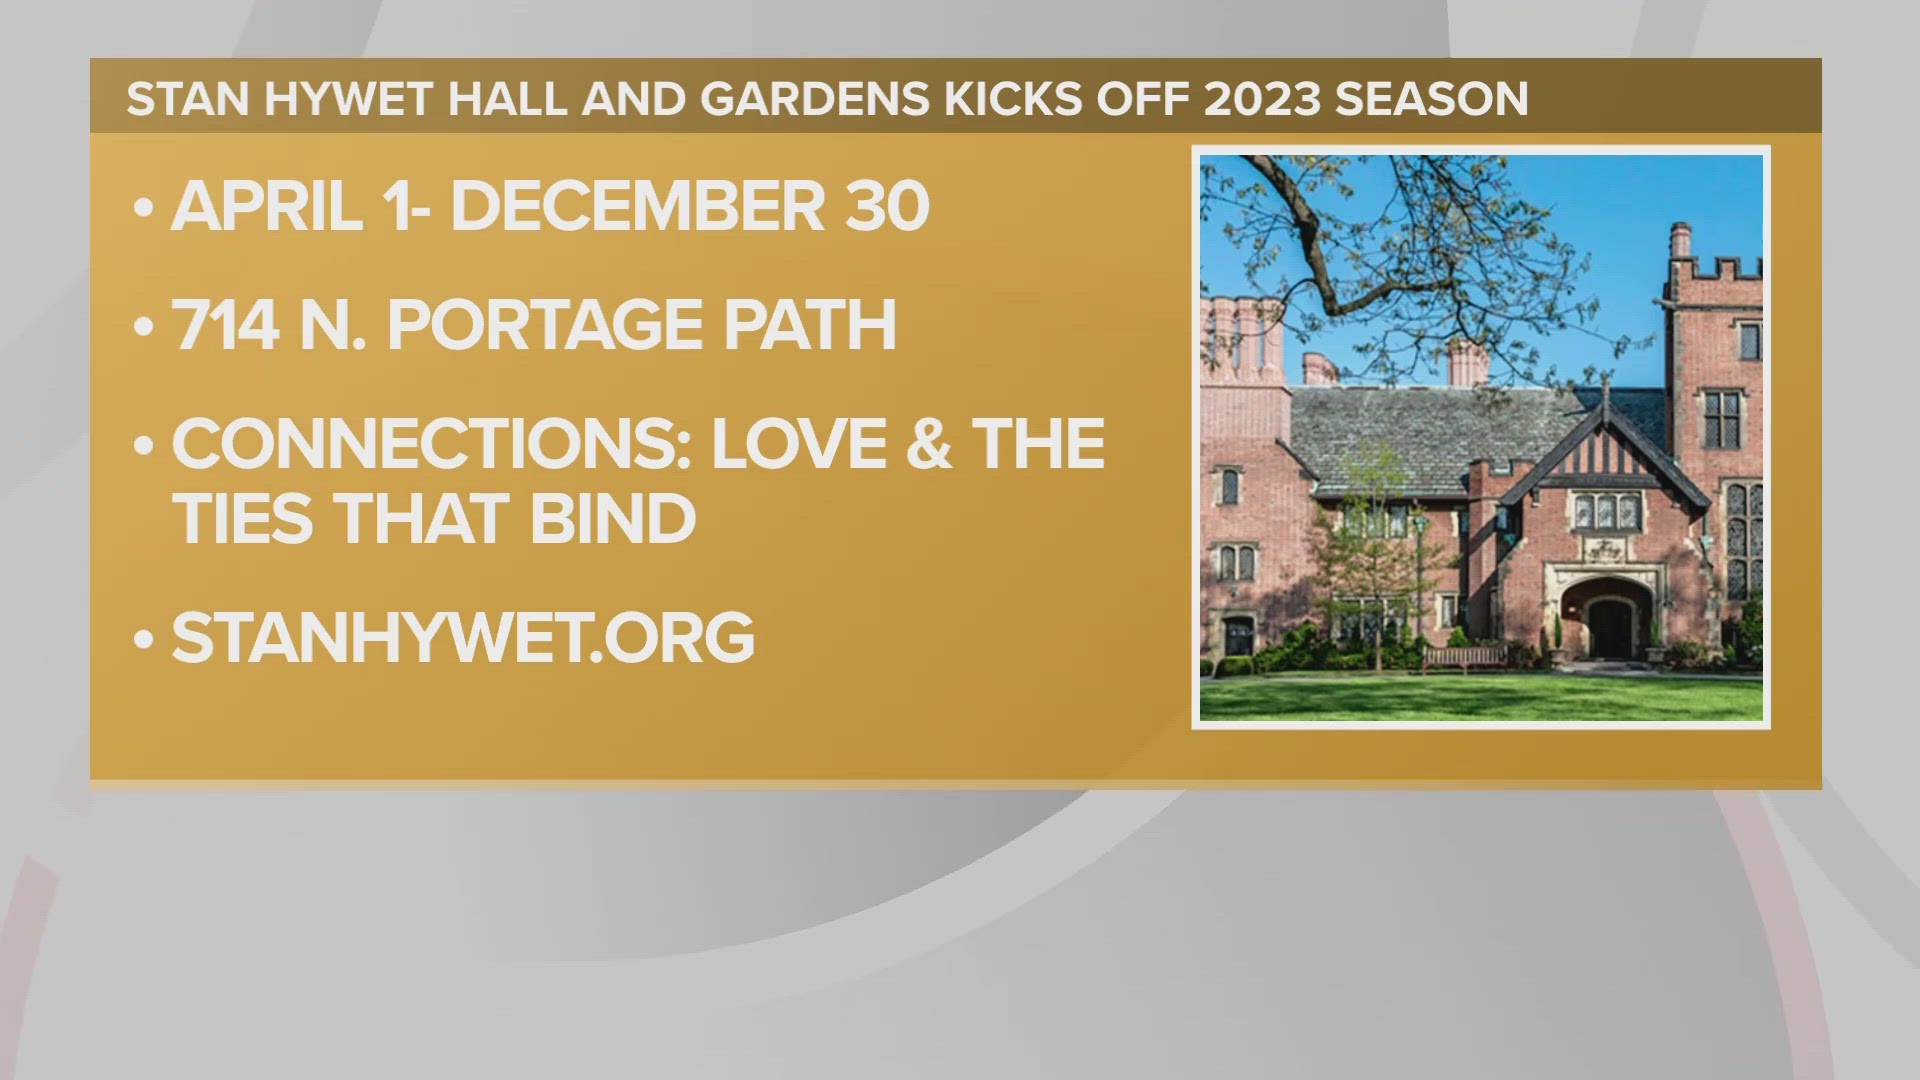 Stan Hywet Hall and Gardens is kicking off the 2023 season in Akron opening up.